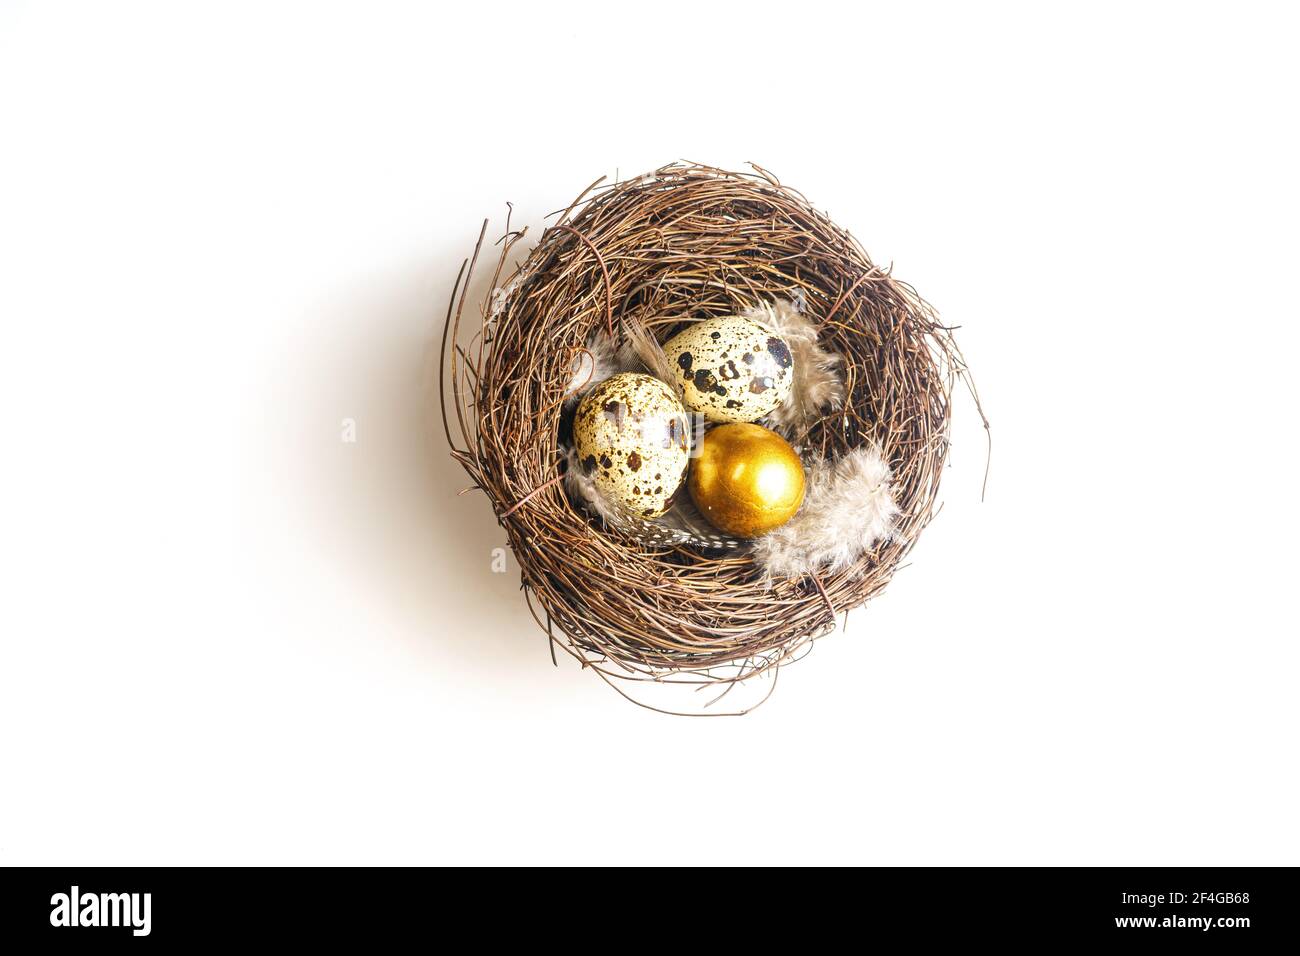 Golden eggs in a birds nest on a whight background Stock Photo